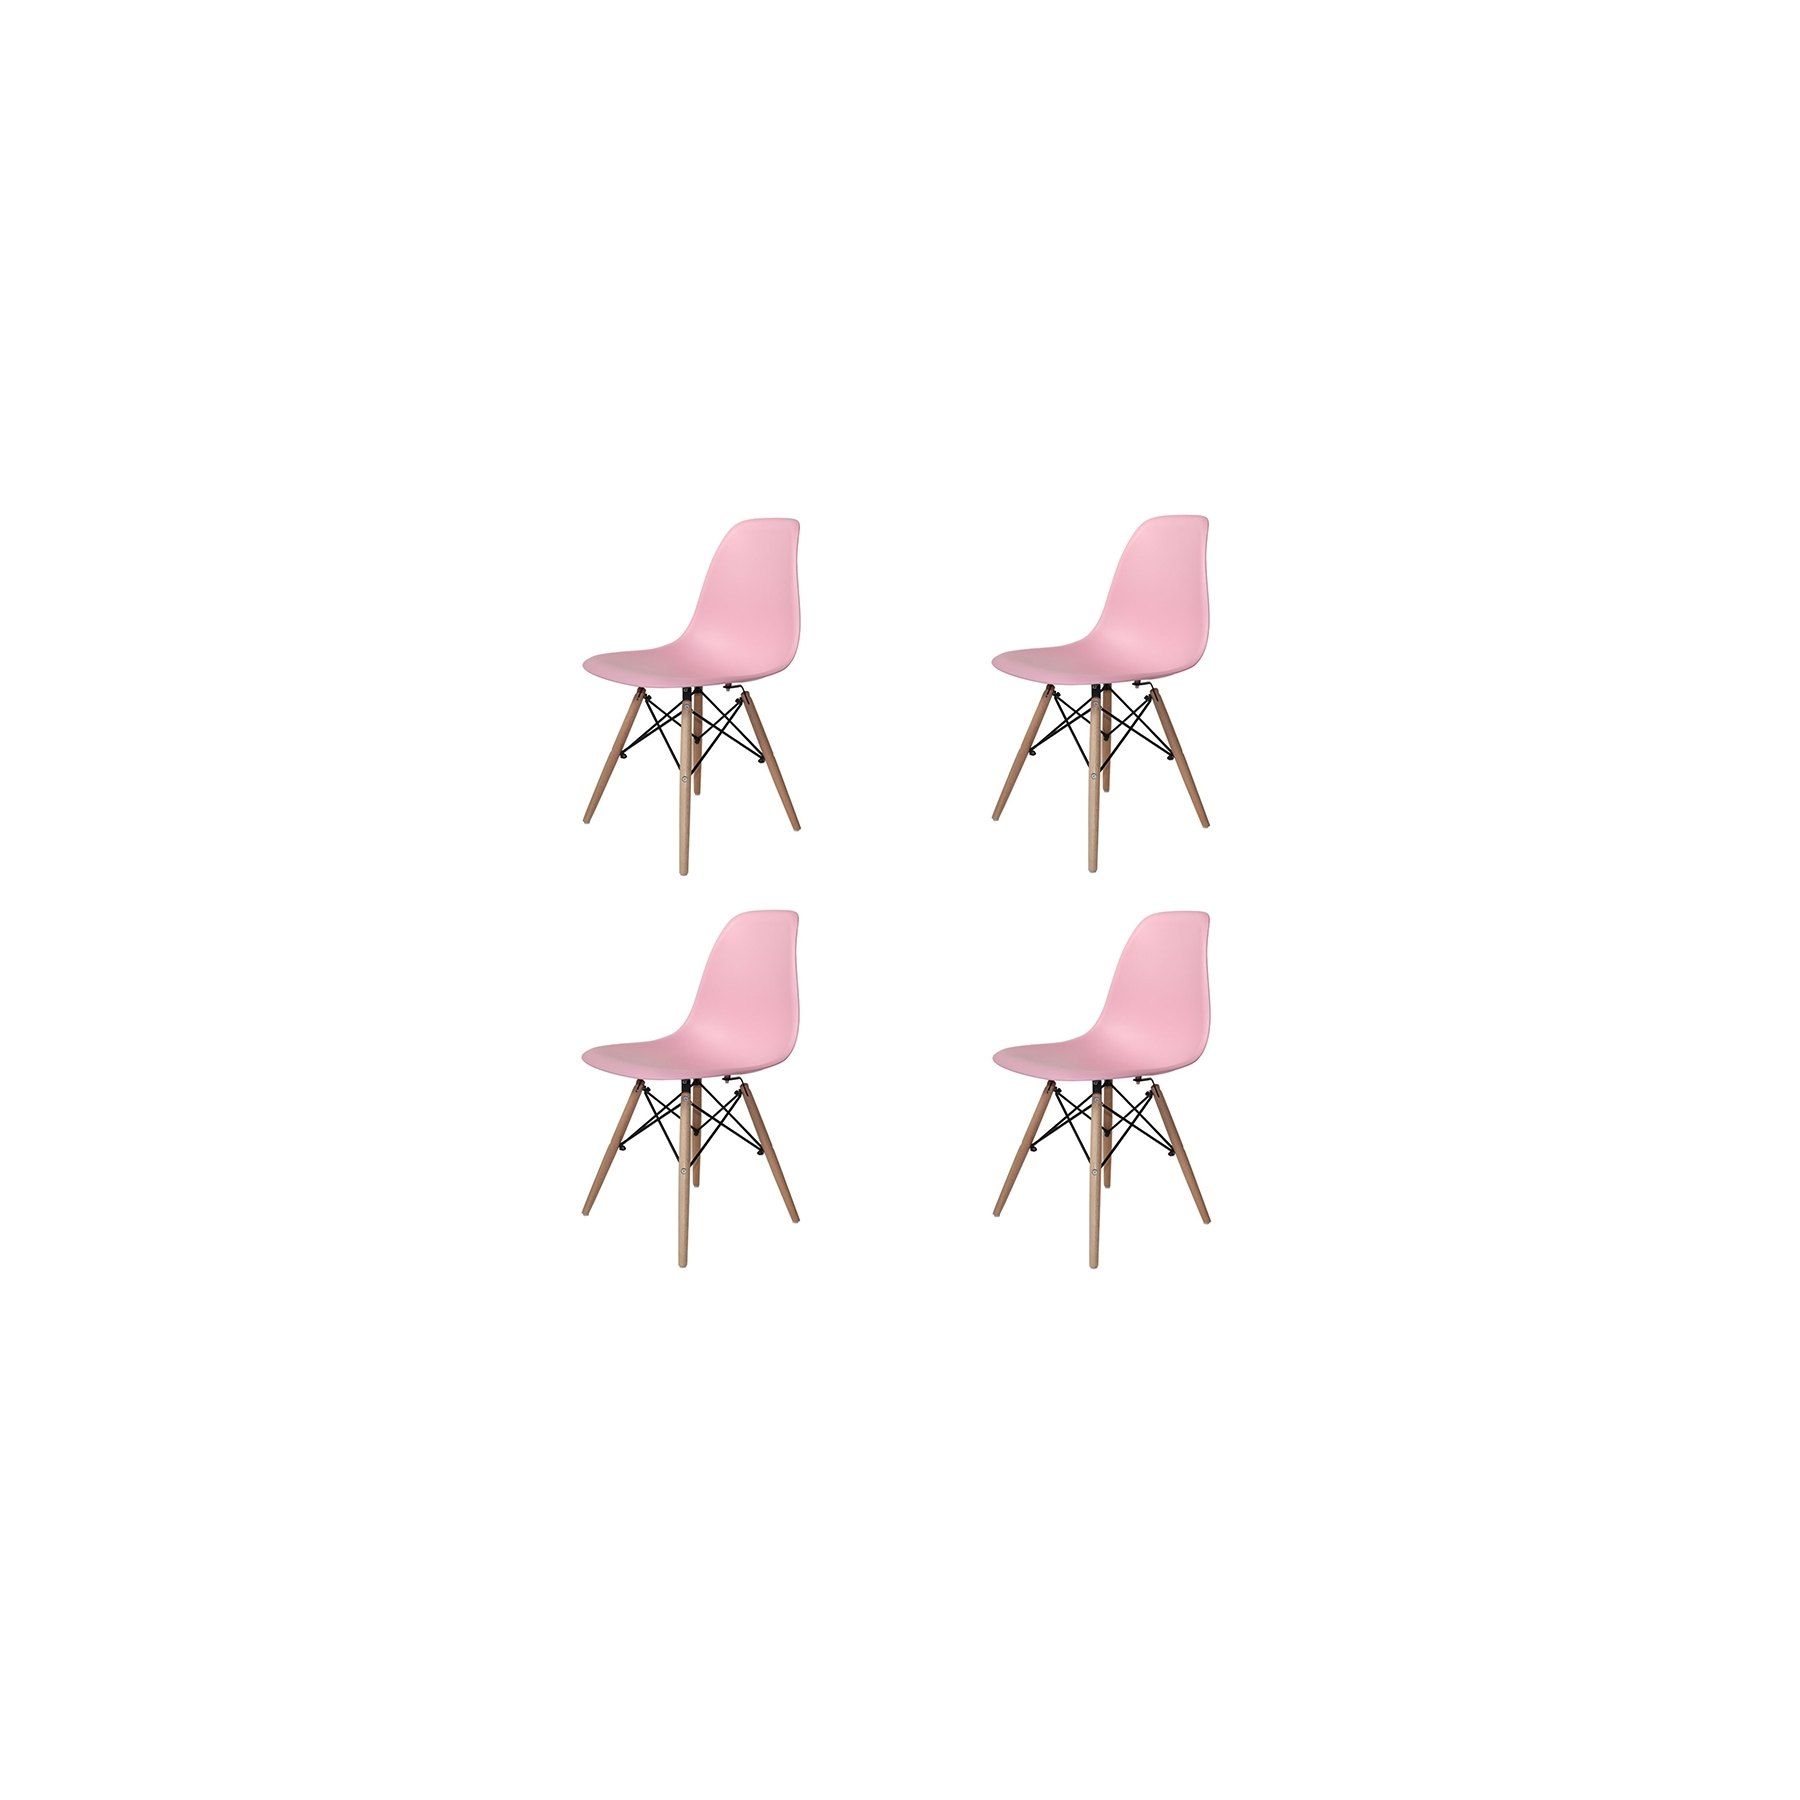 PACK 4 CHAISES TOWER WOOD ROSES EXTRA QUALITY